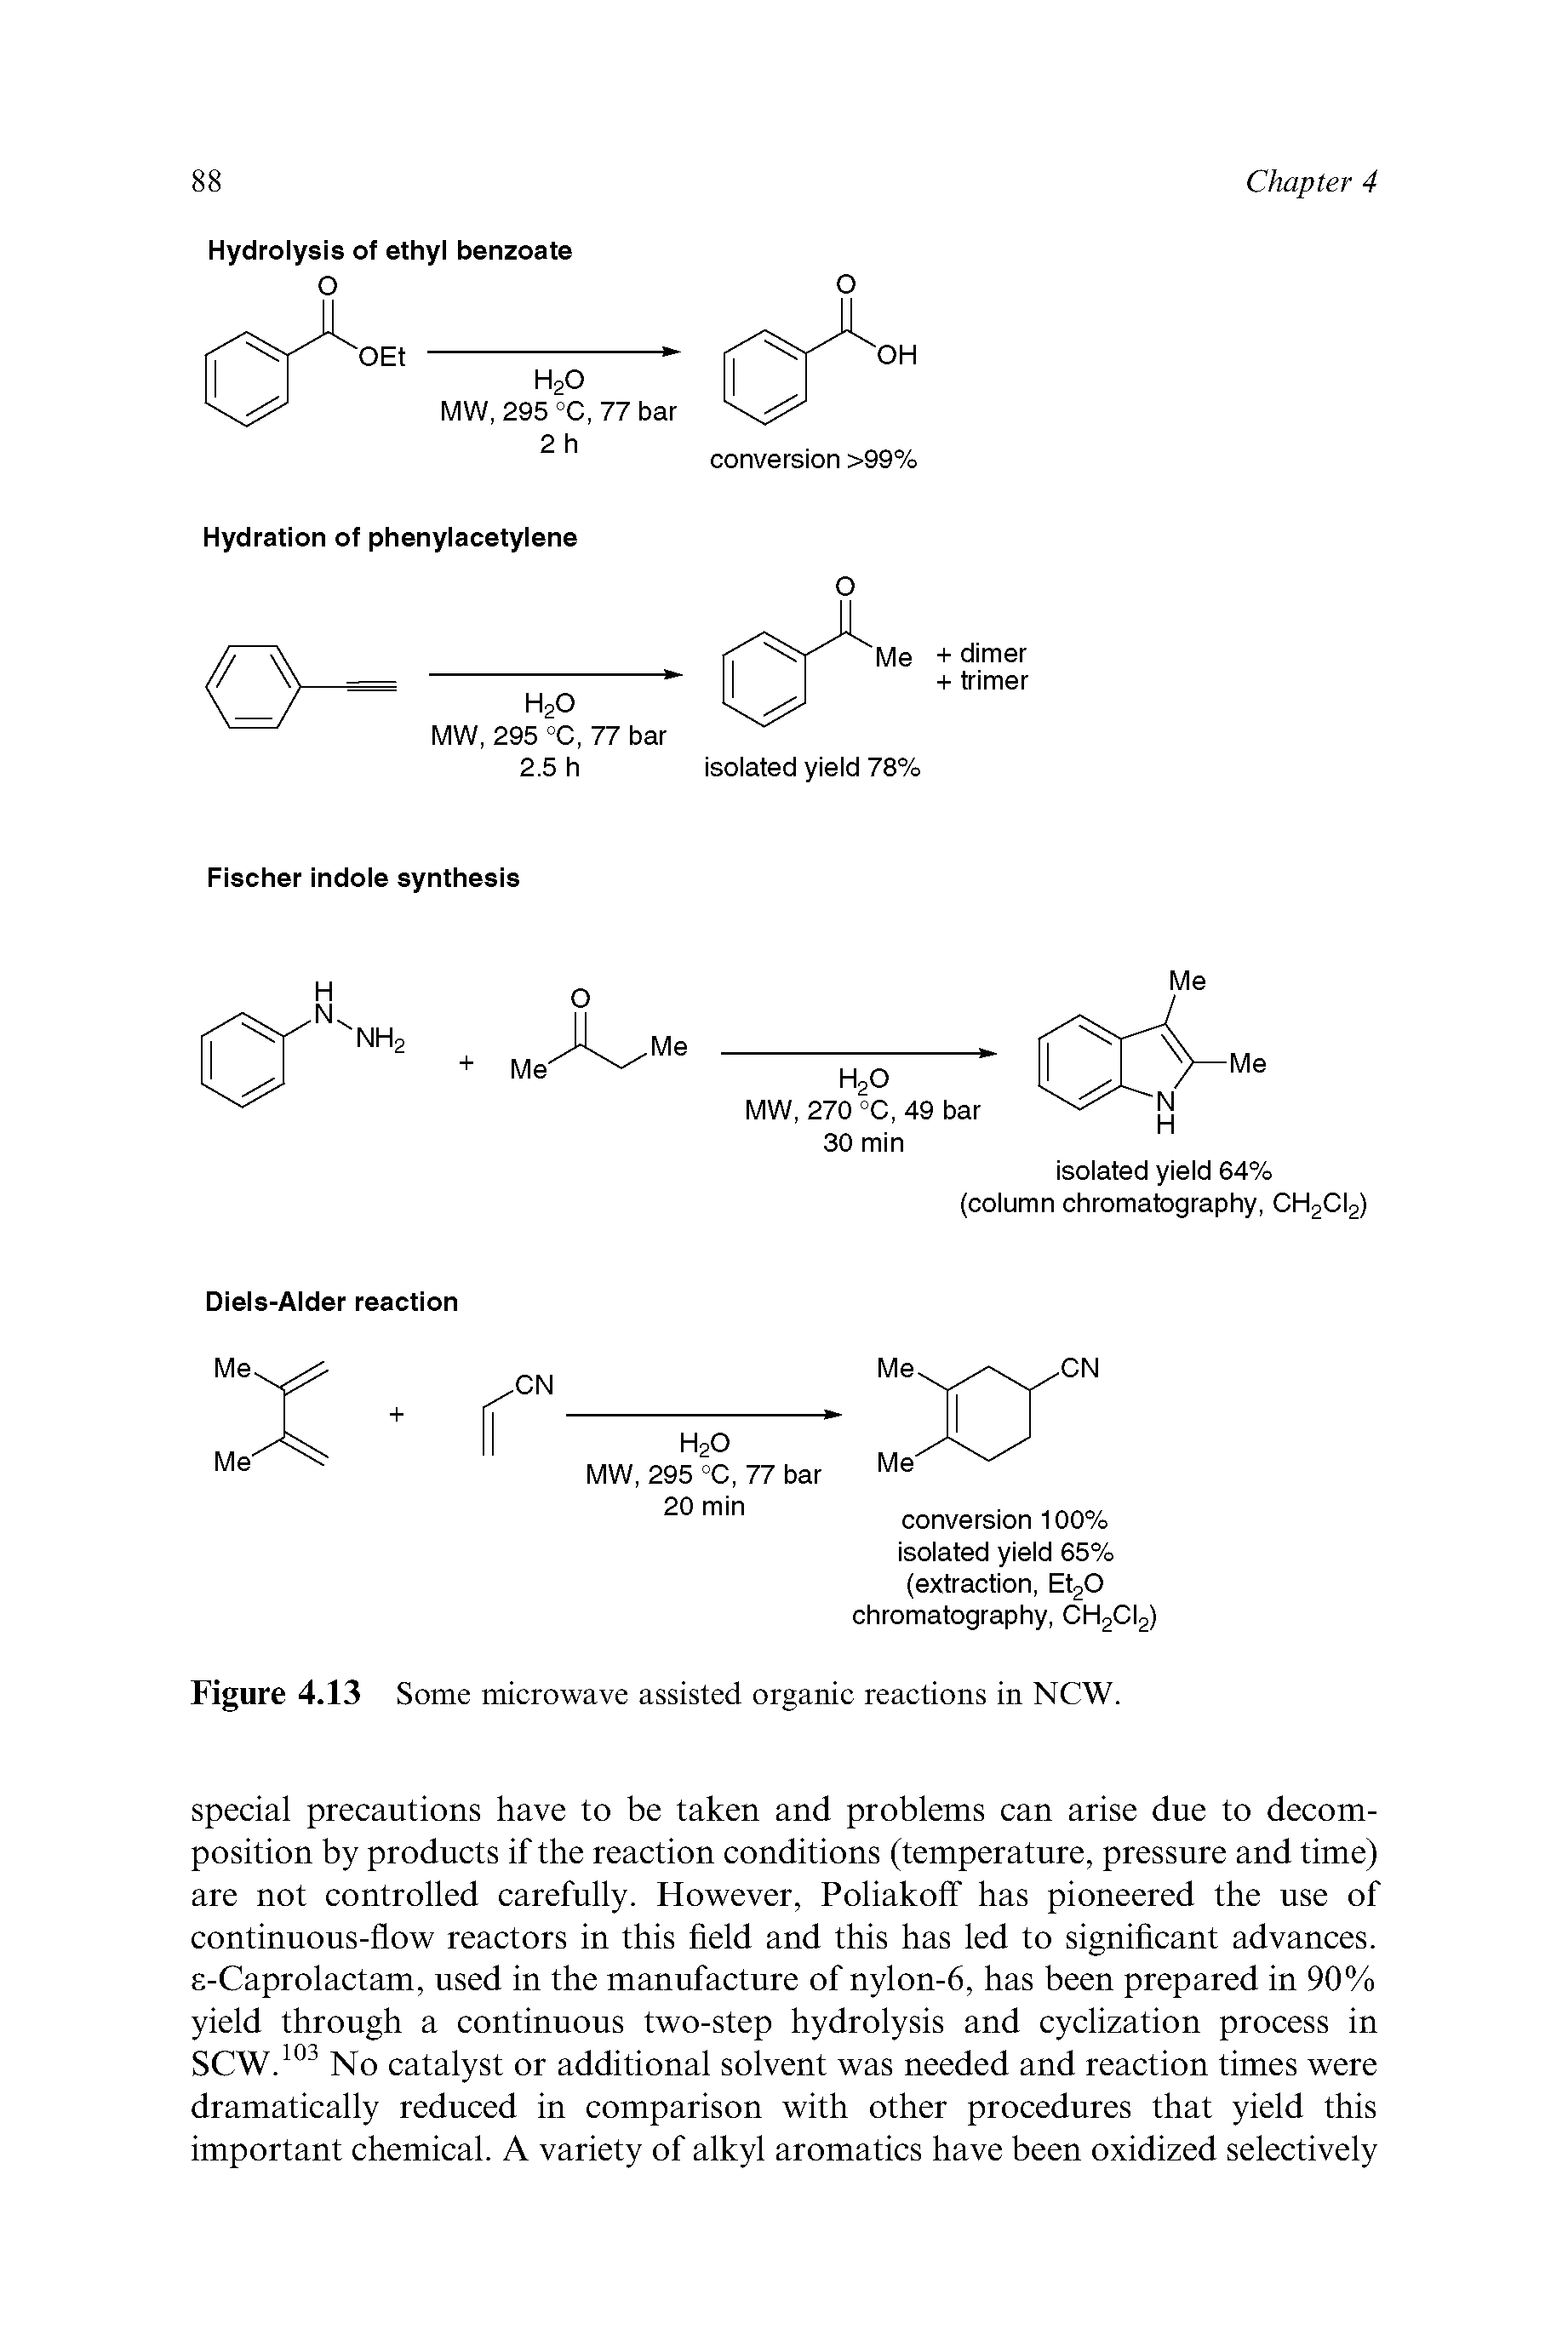 Figure 4.13 Some microwave assisted organic reactions in NCW.